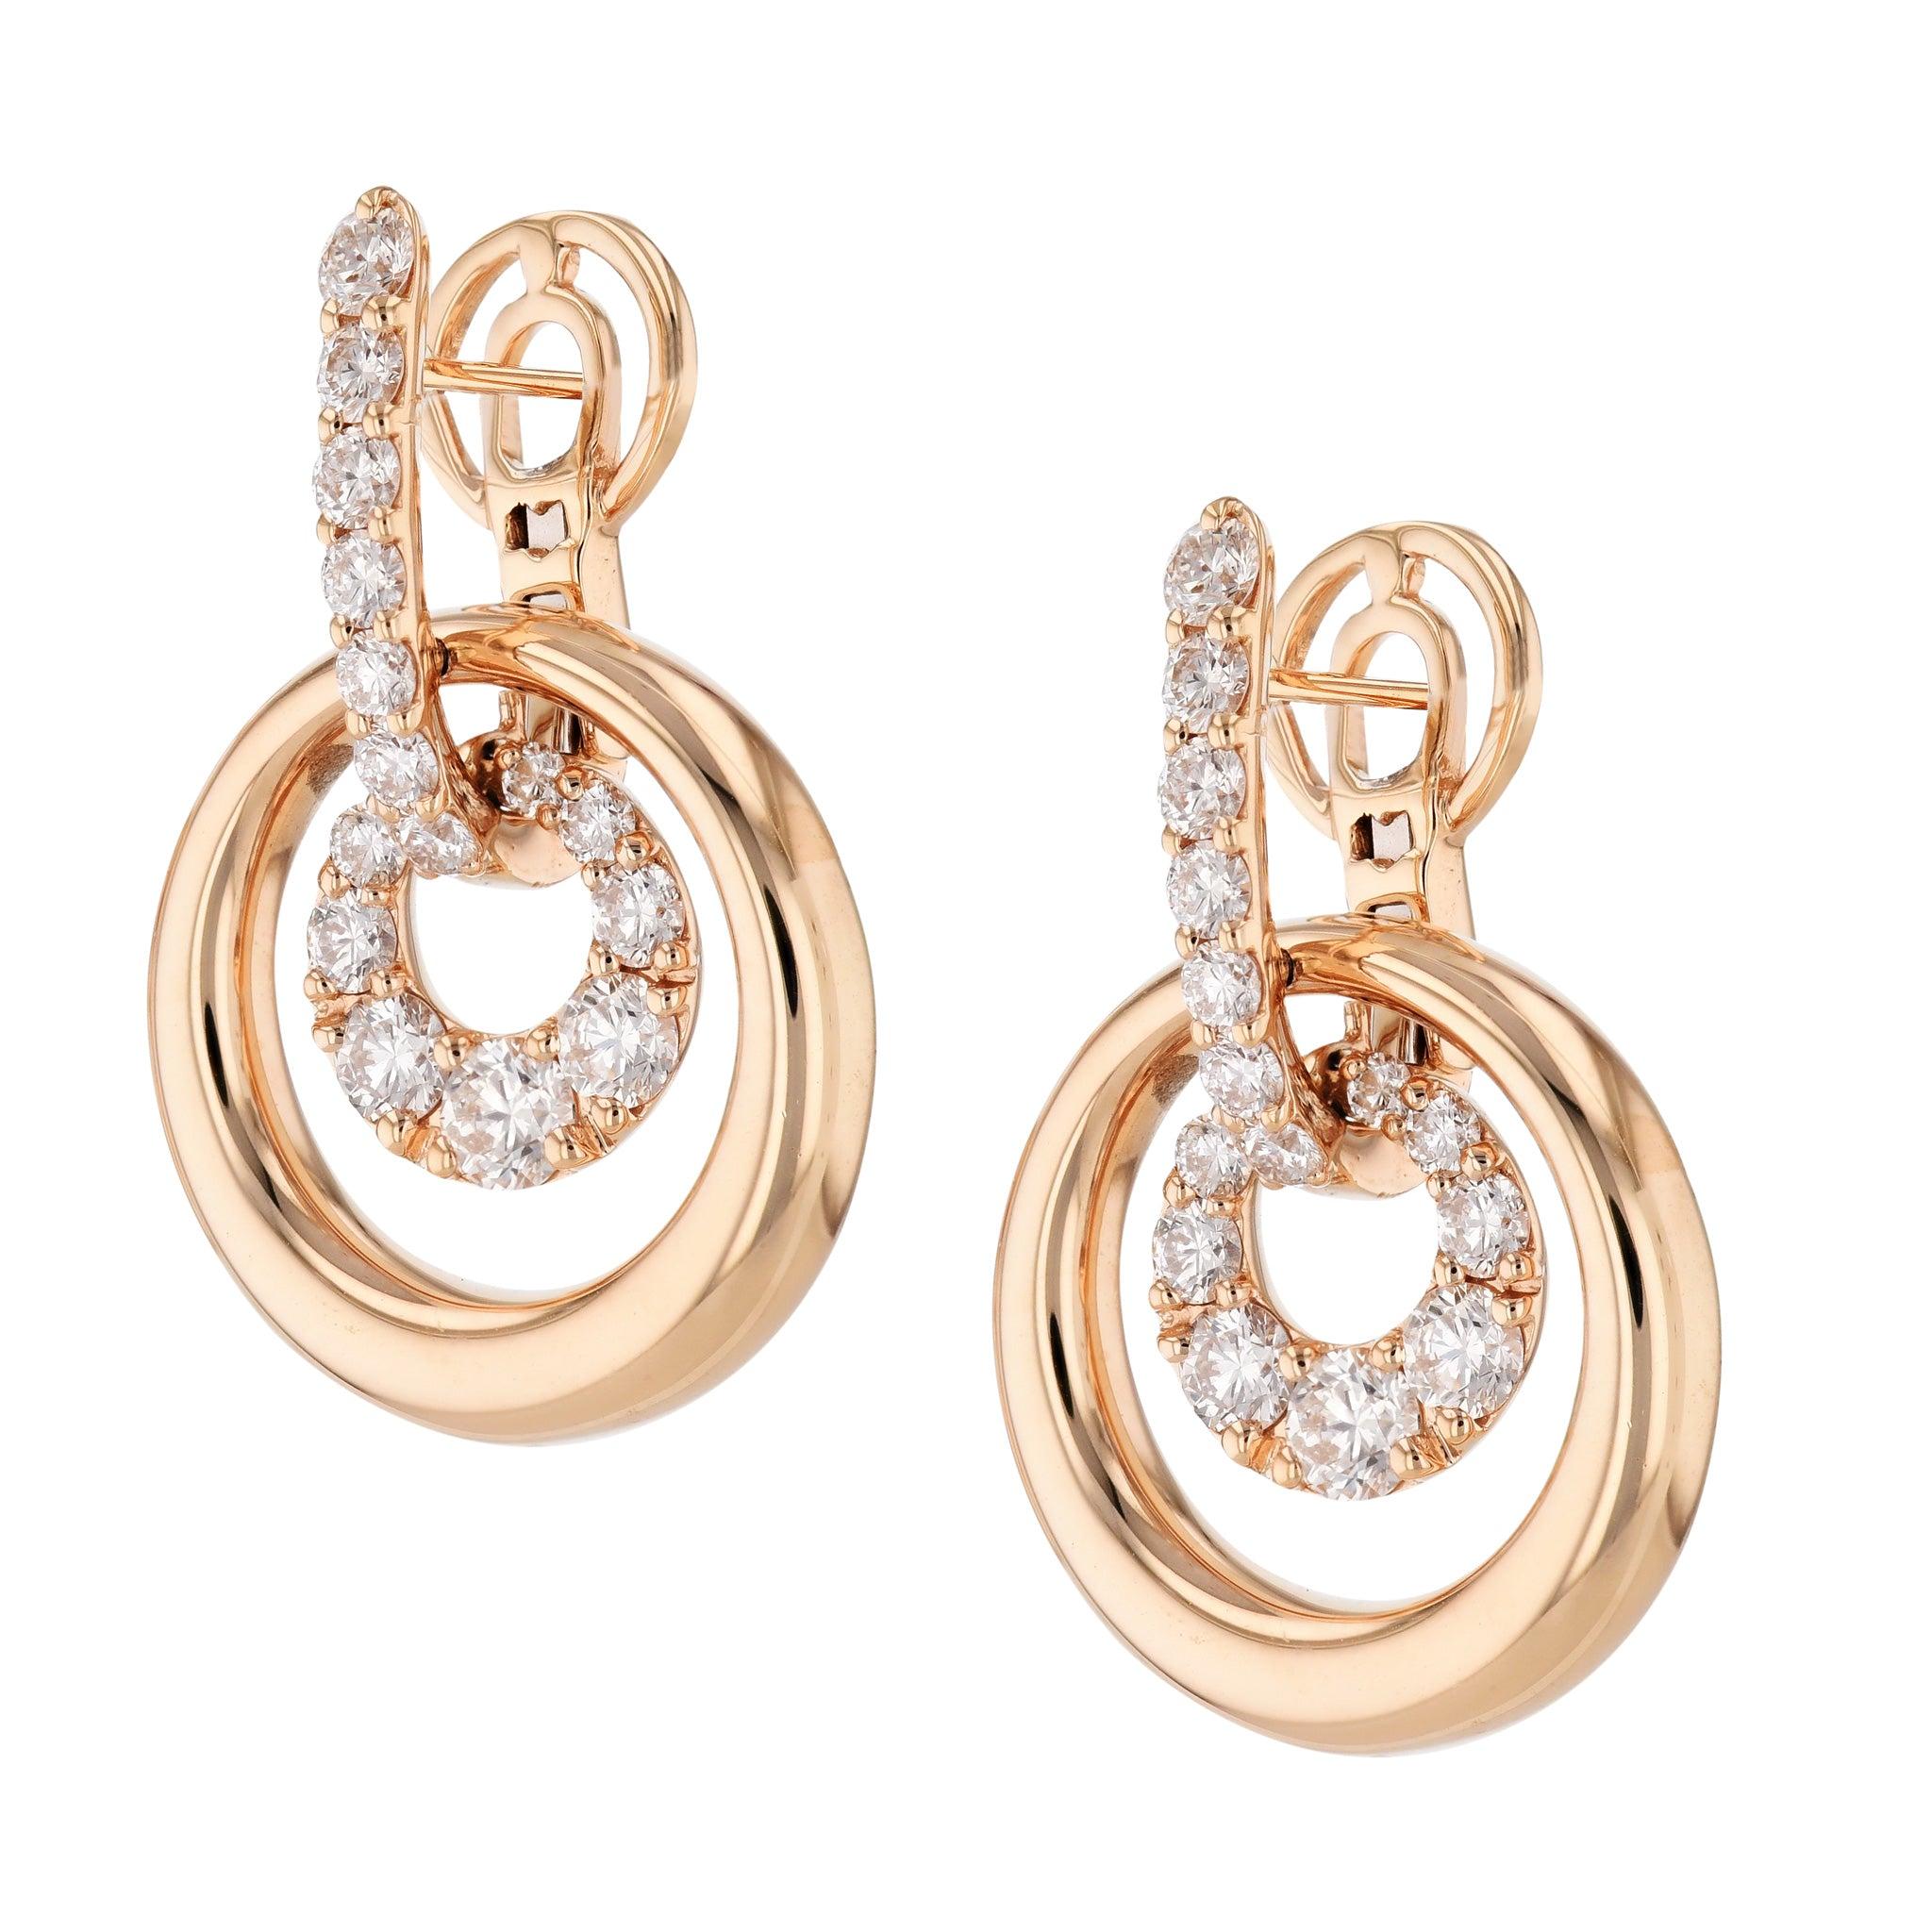 Stunning 18 karat Rose Gold Hoop Drop Earrings, elegantly encrusted with shimmering diamonds! Perfect for dressing up any look, these magnificent inside-out hoops will draw admiration and envy in equal measure! 18 karat . Rose Gold Earrings with